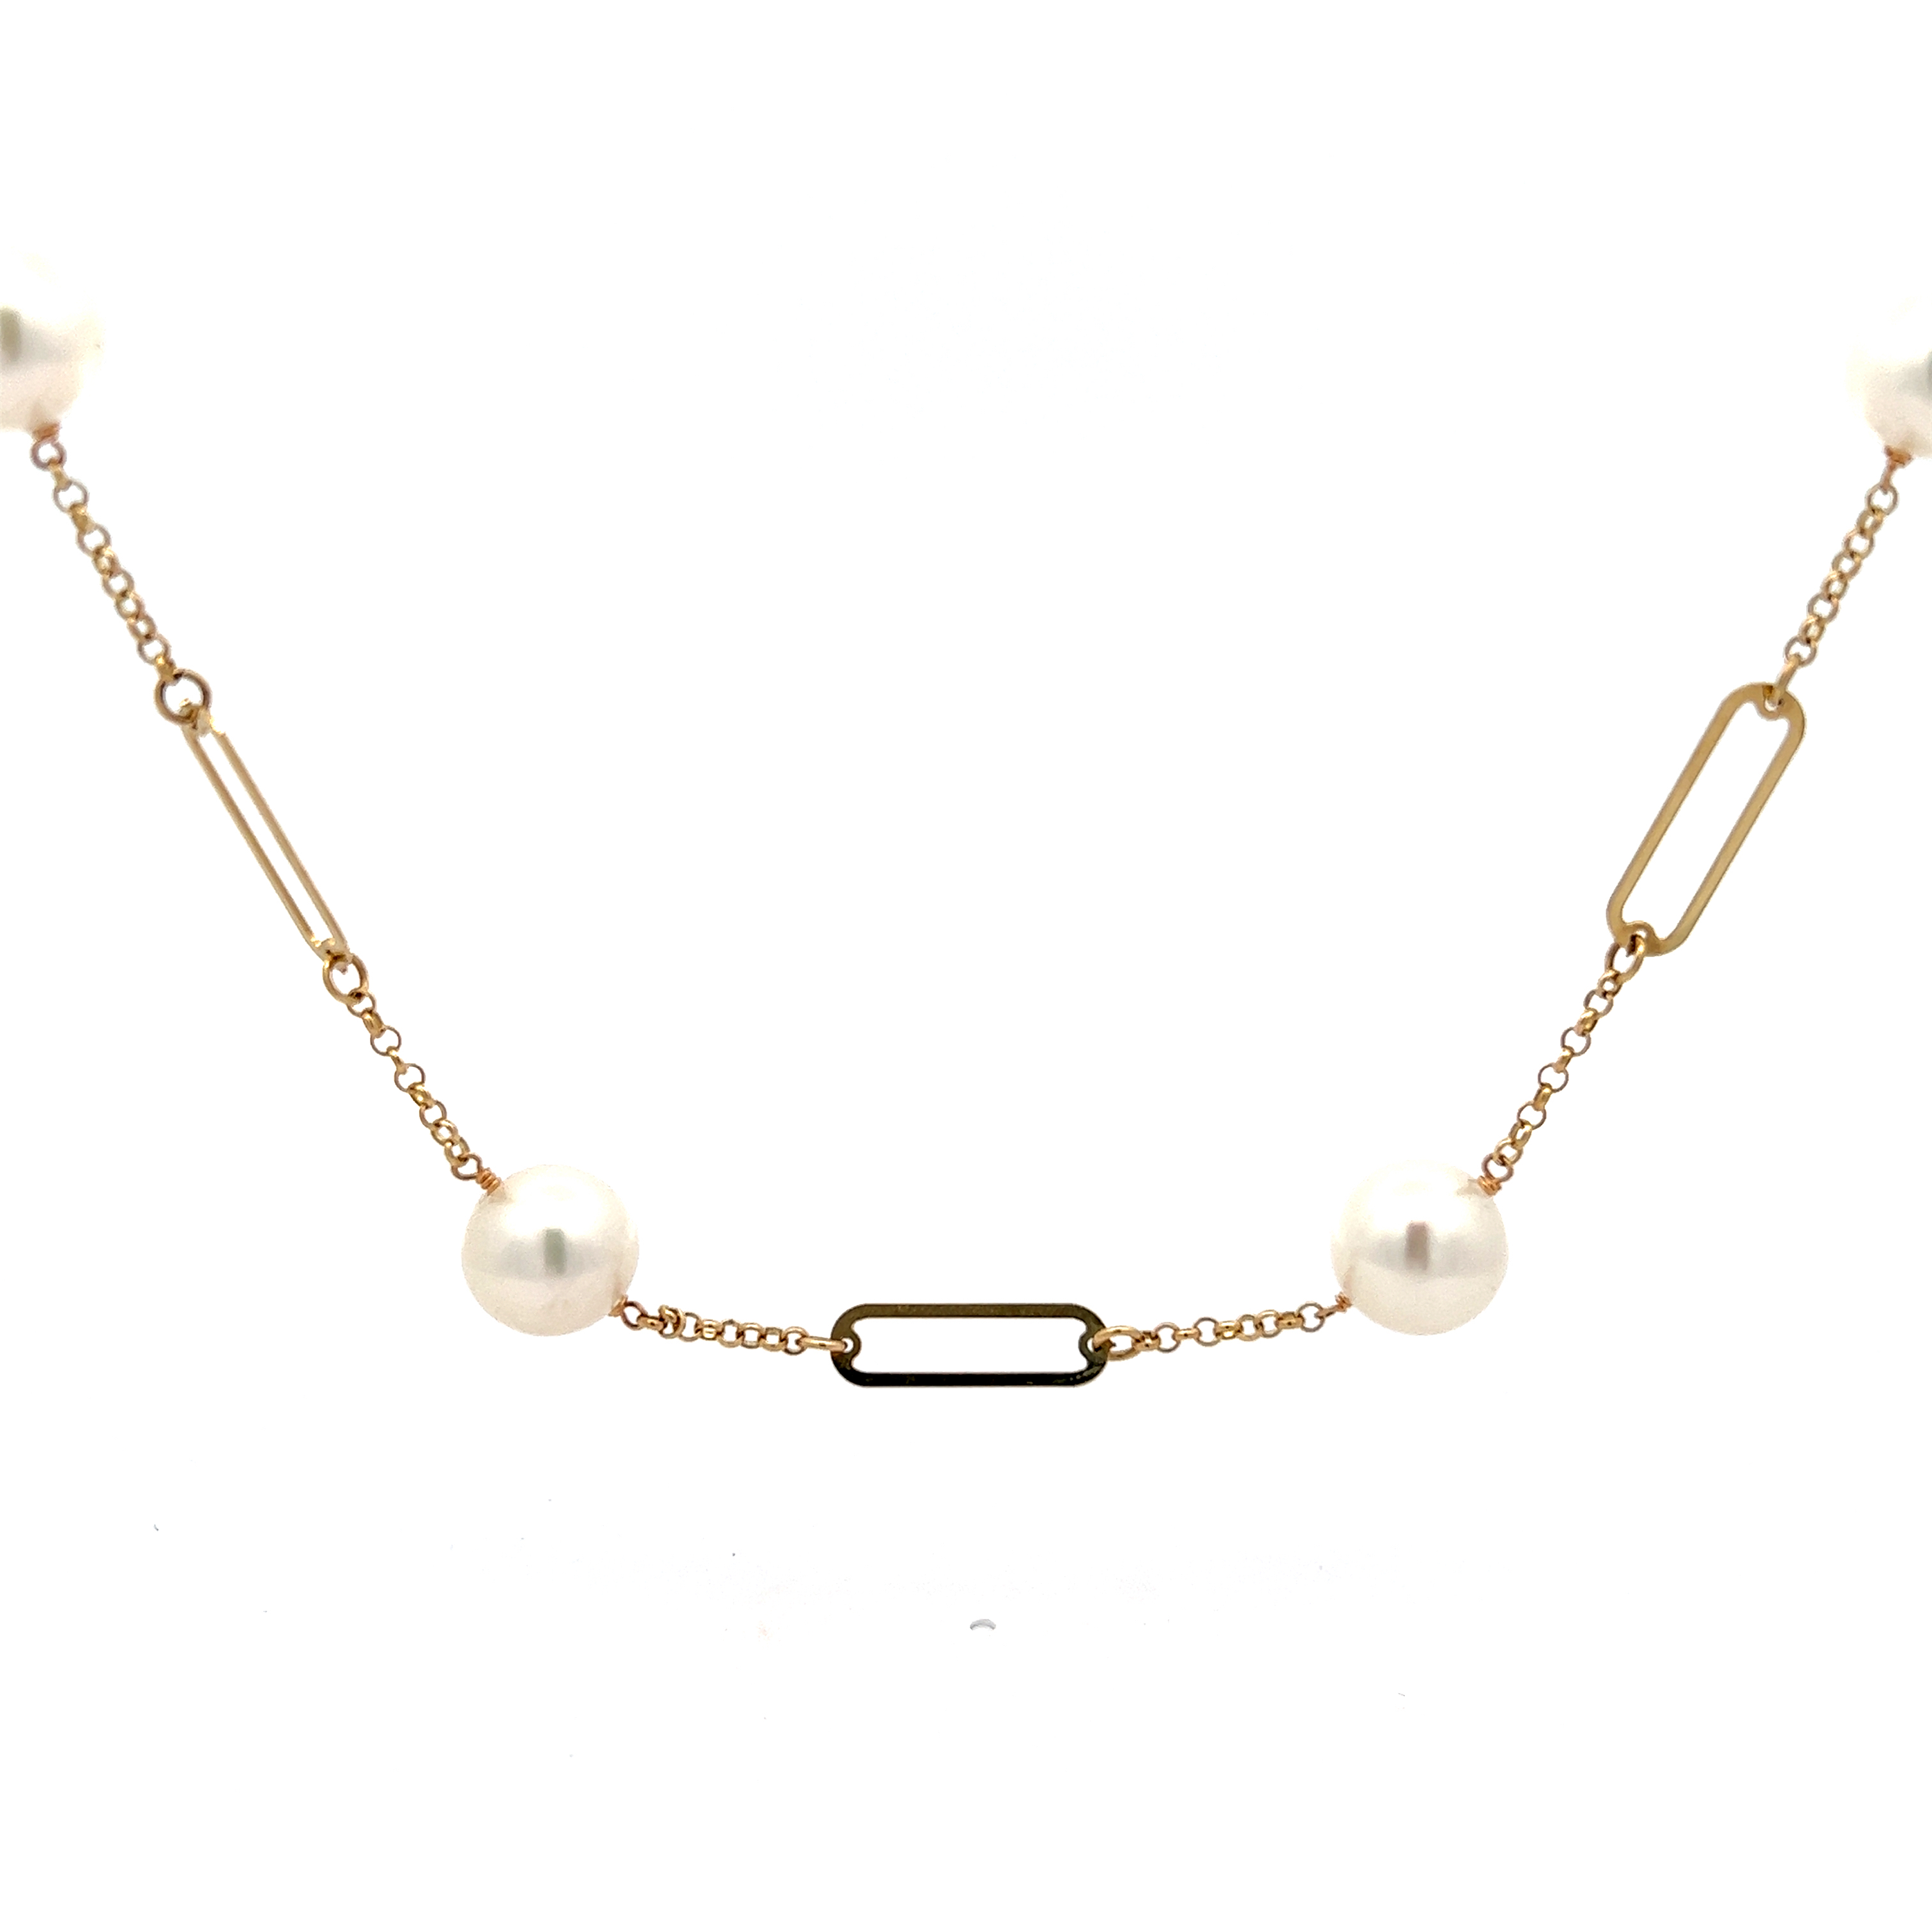 14 Karat yellow gold tin cup necklace with 6=9.00-10.00mm Fresh Water Pearls. Length 20"